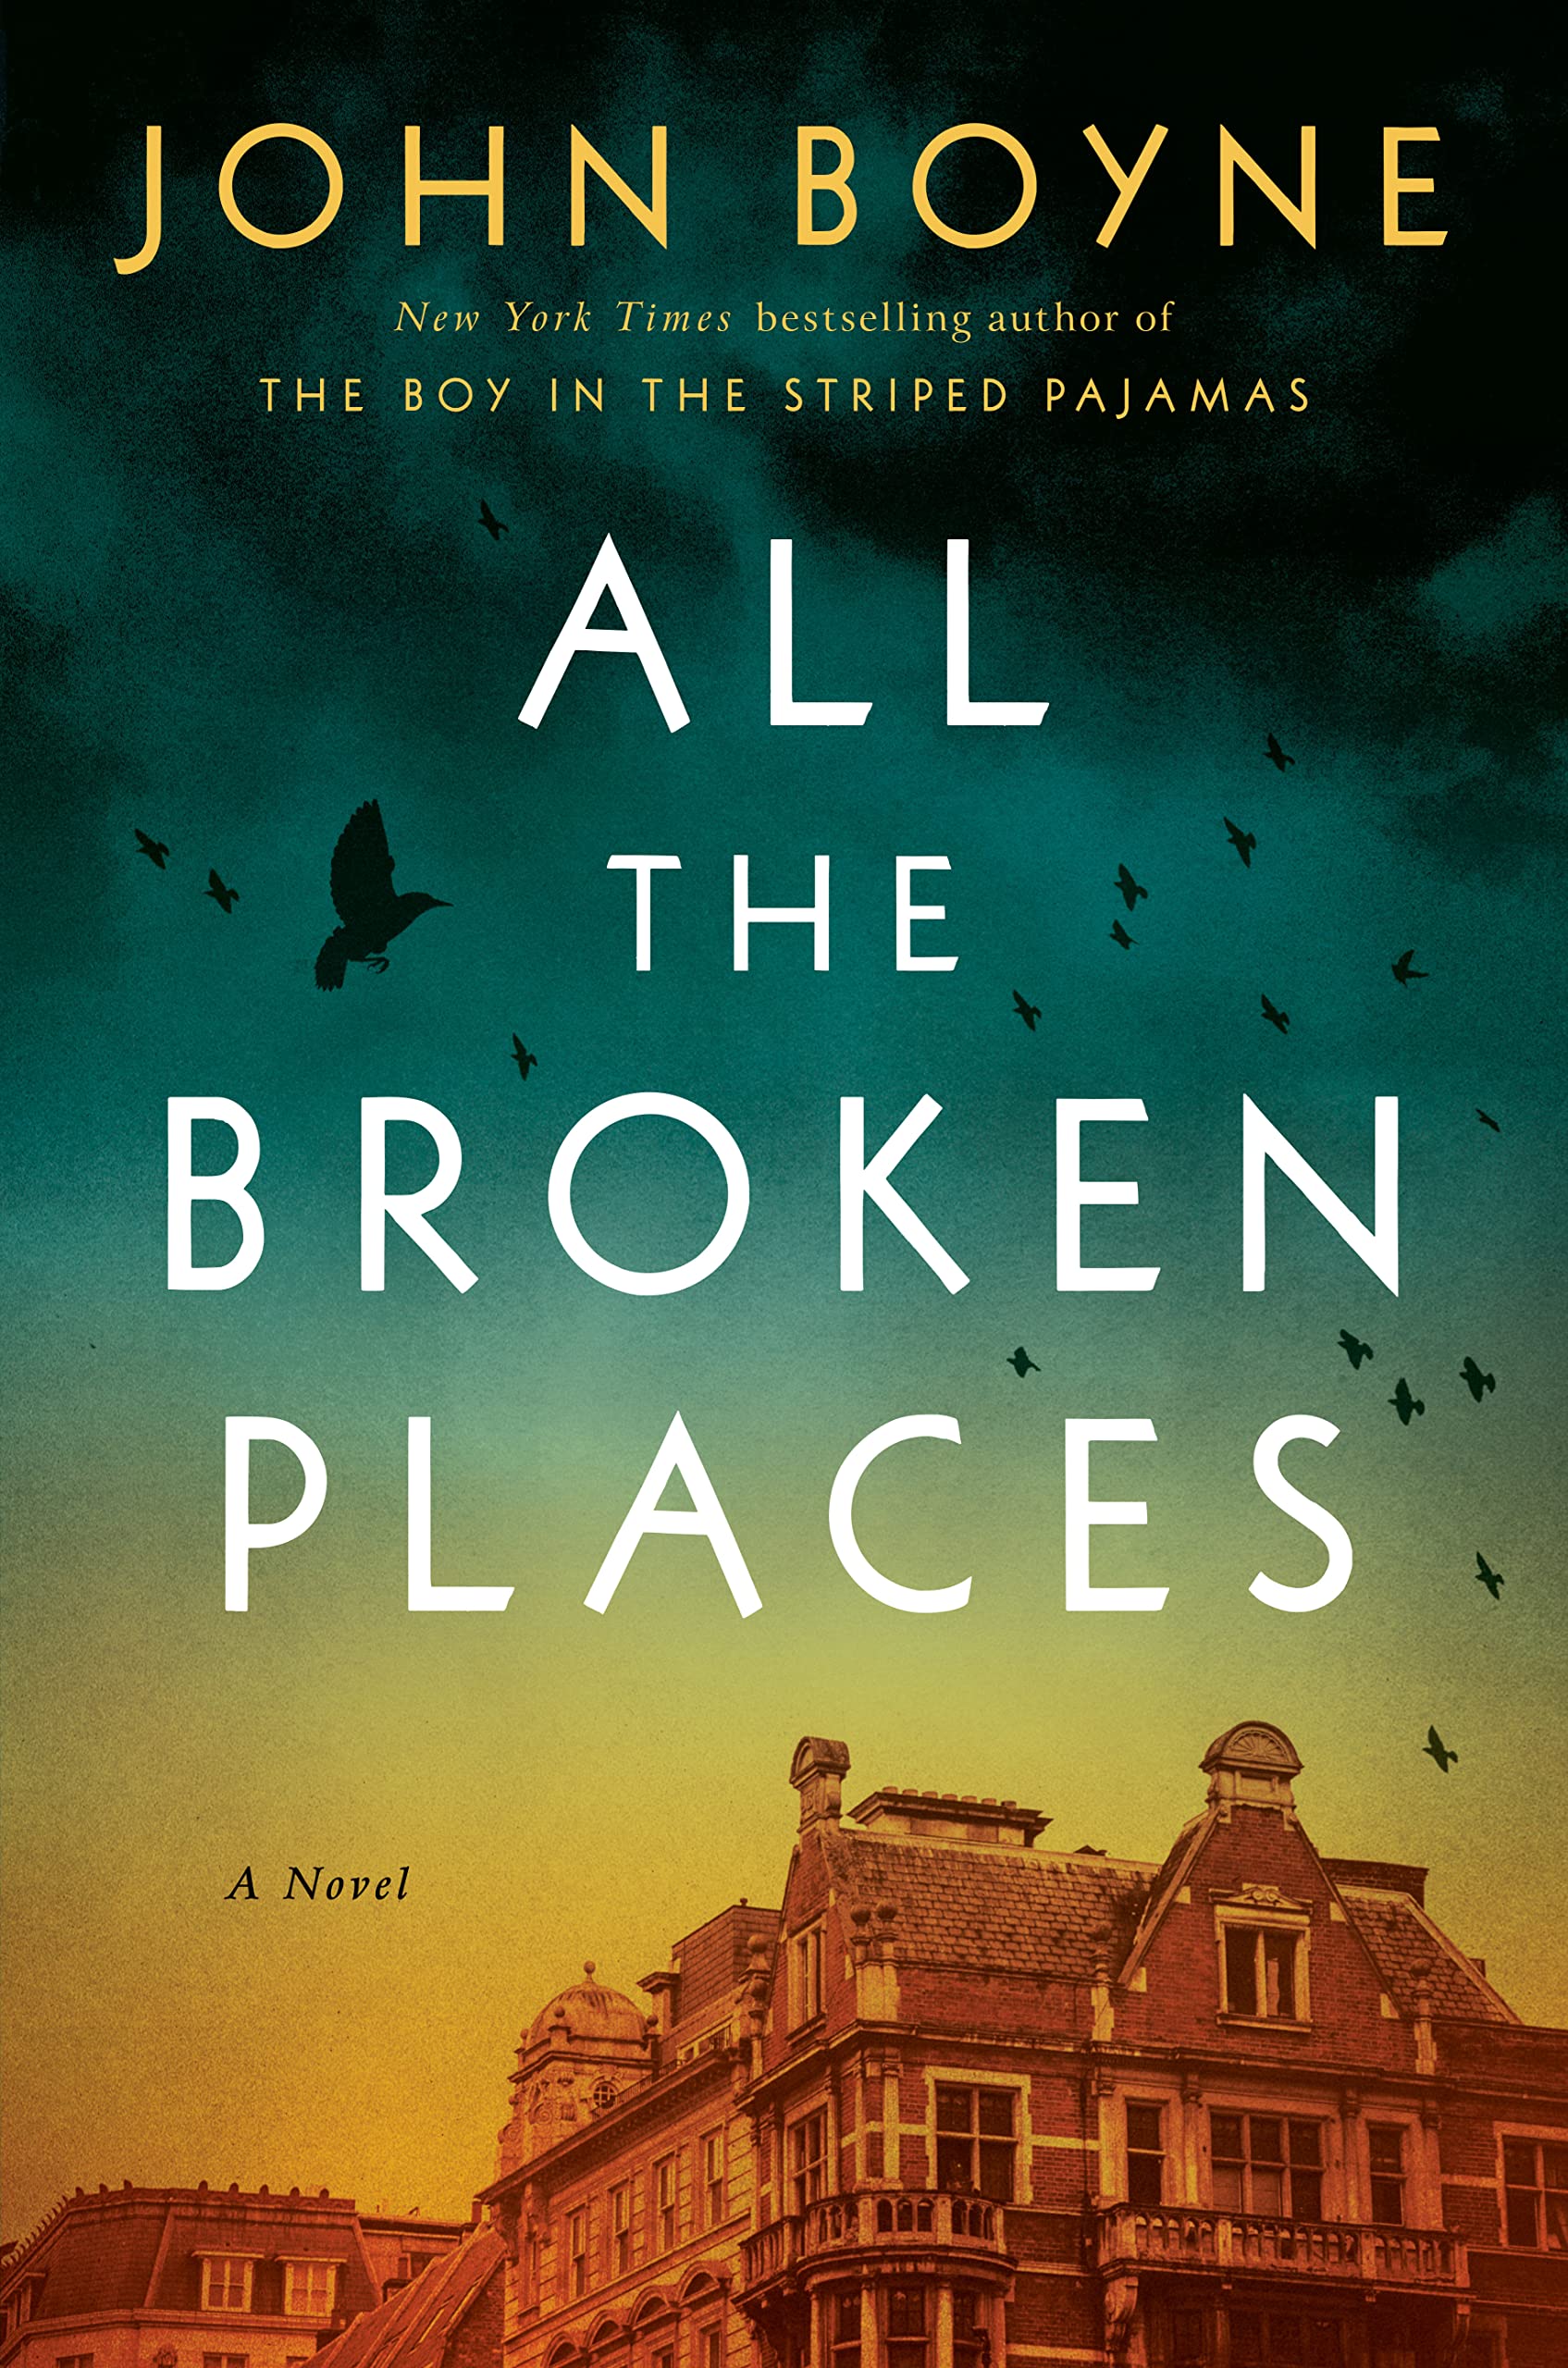 Image for "All the Broken Places"